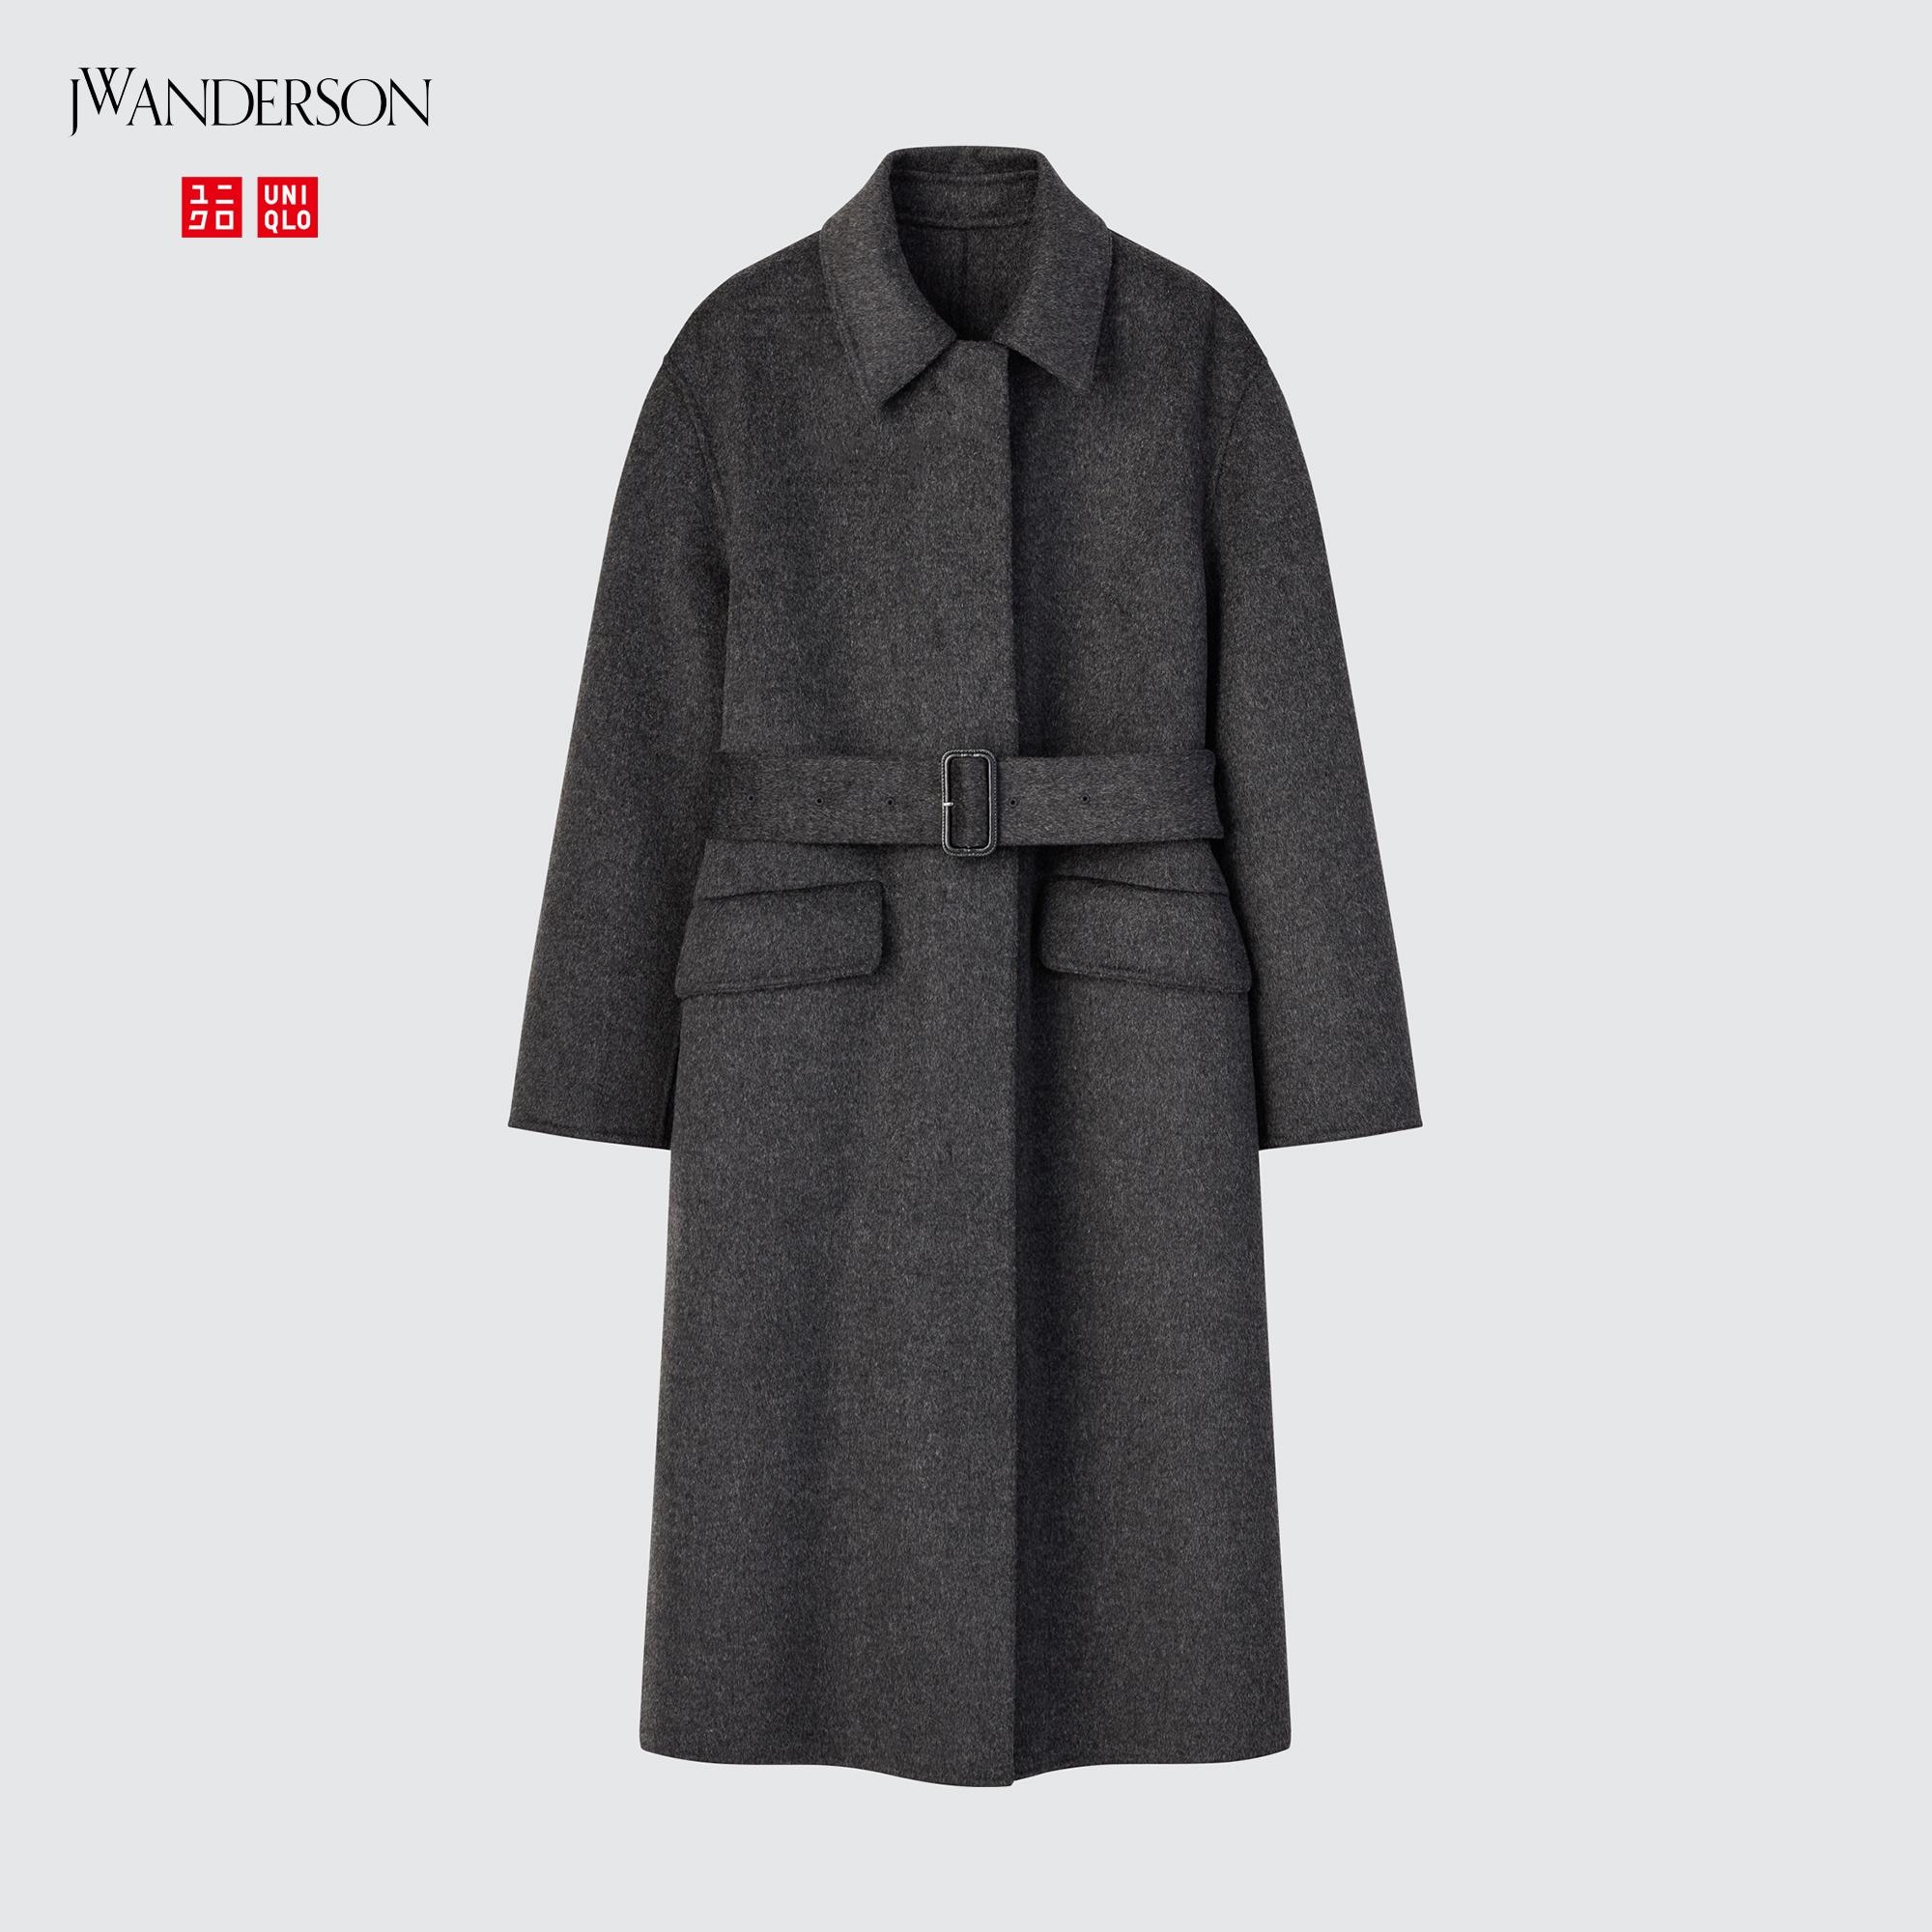 WOMENS JW ANDERSON DOUBLE FACE BELTED COAT  UNIQLO AU